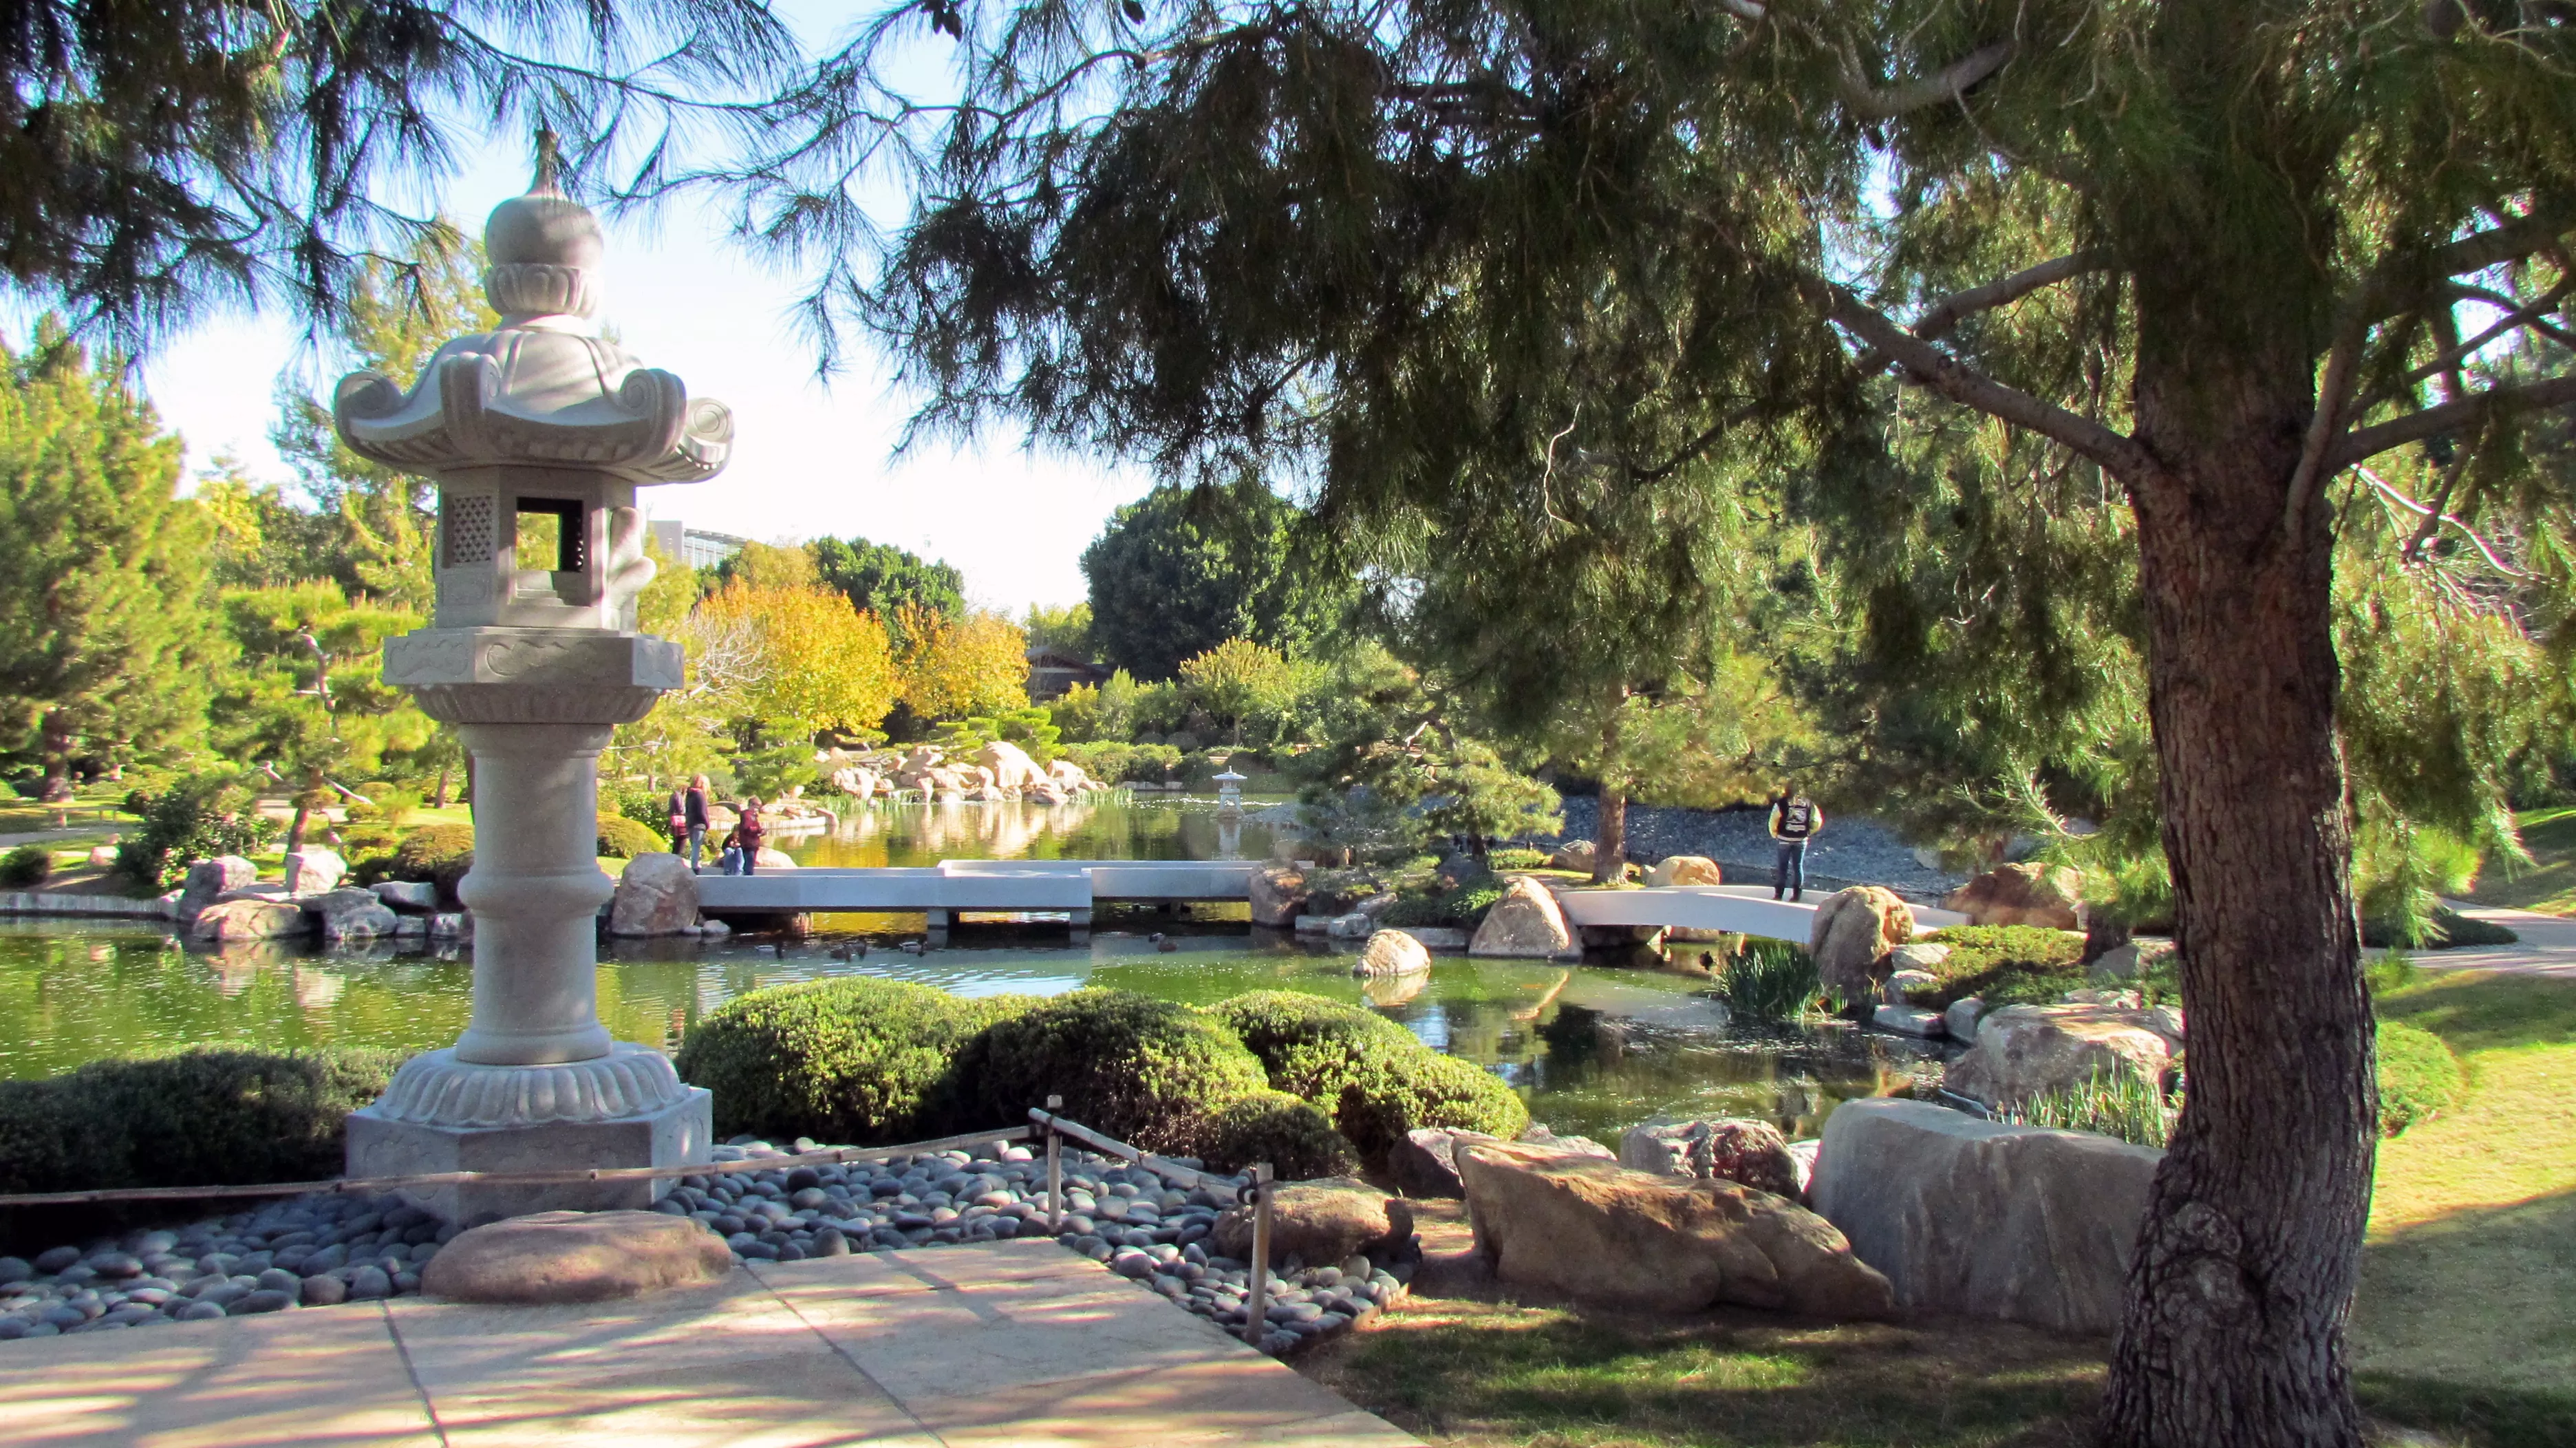 The Japanese Friendship Garden in USA, North America | Botanical Gardens - Rated 3.7